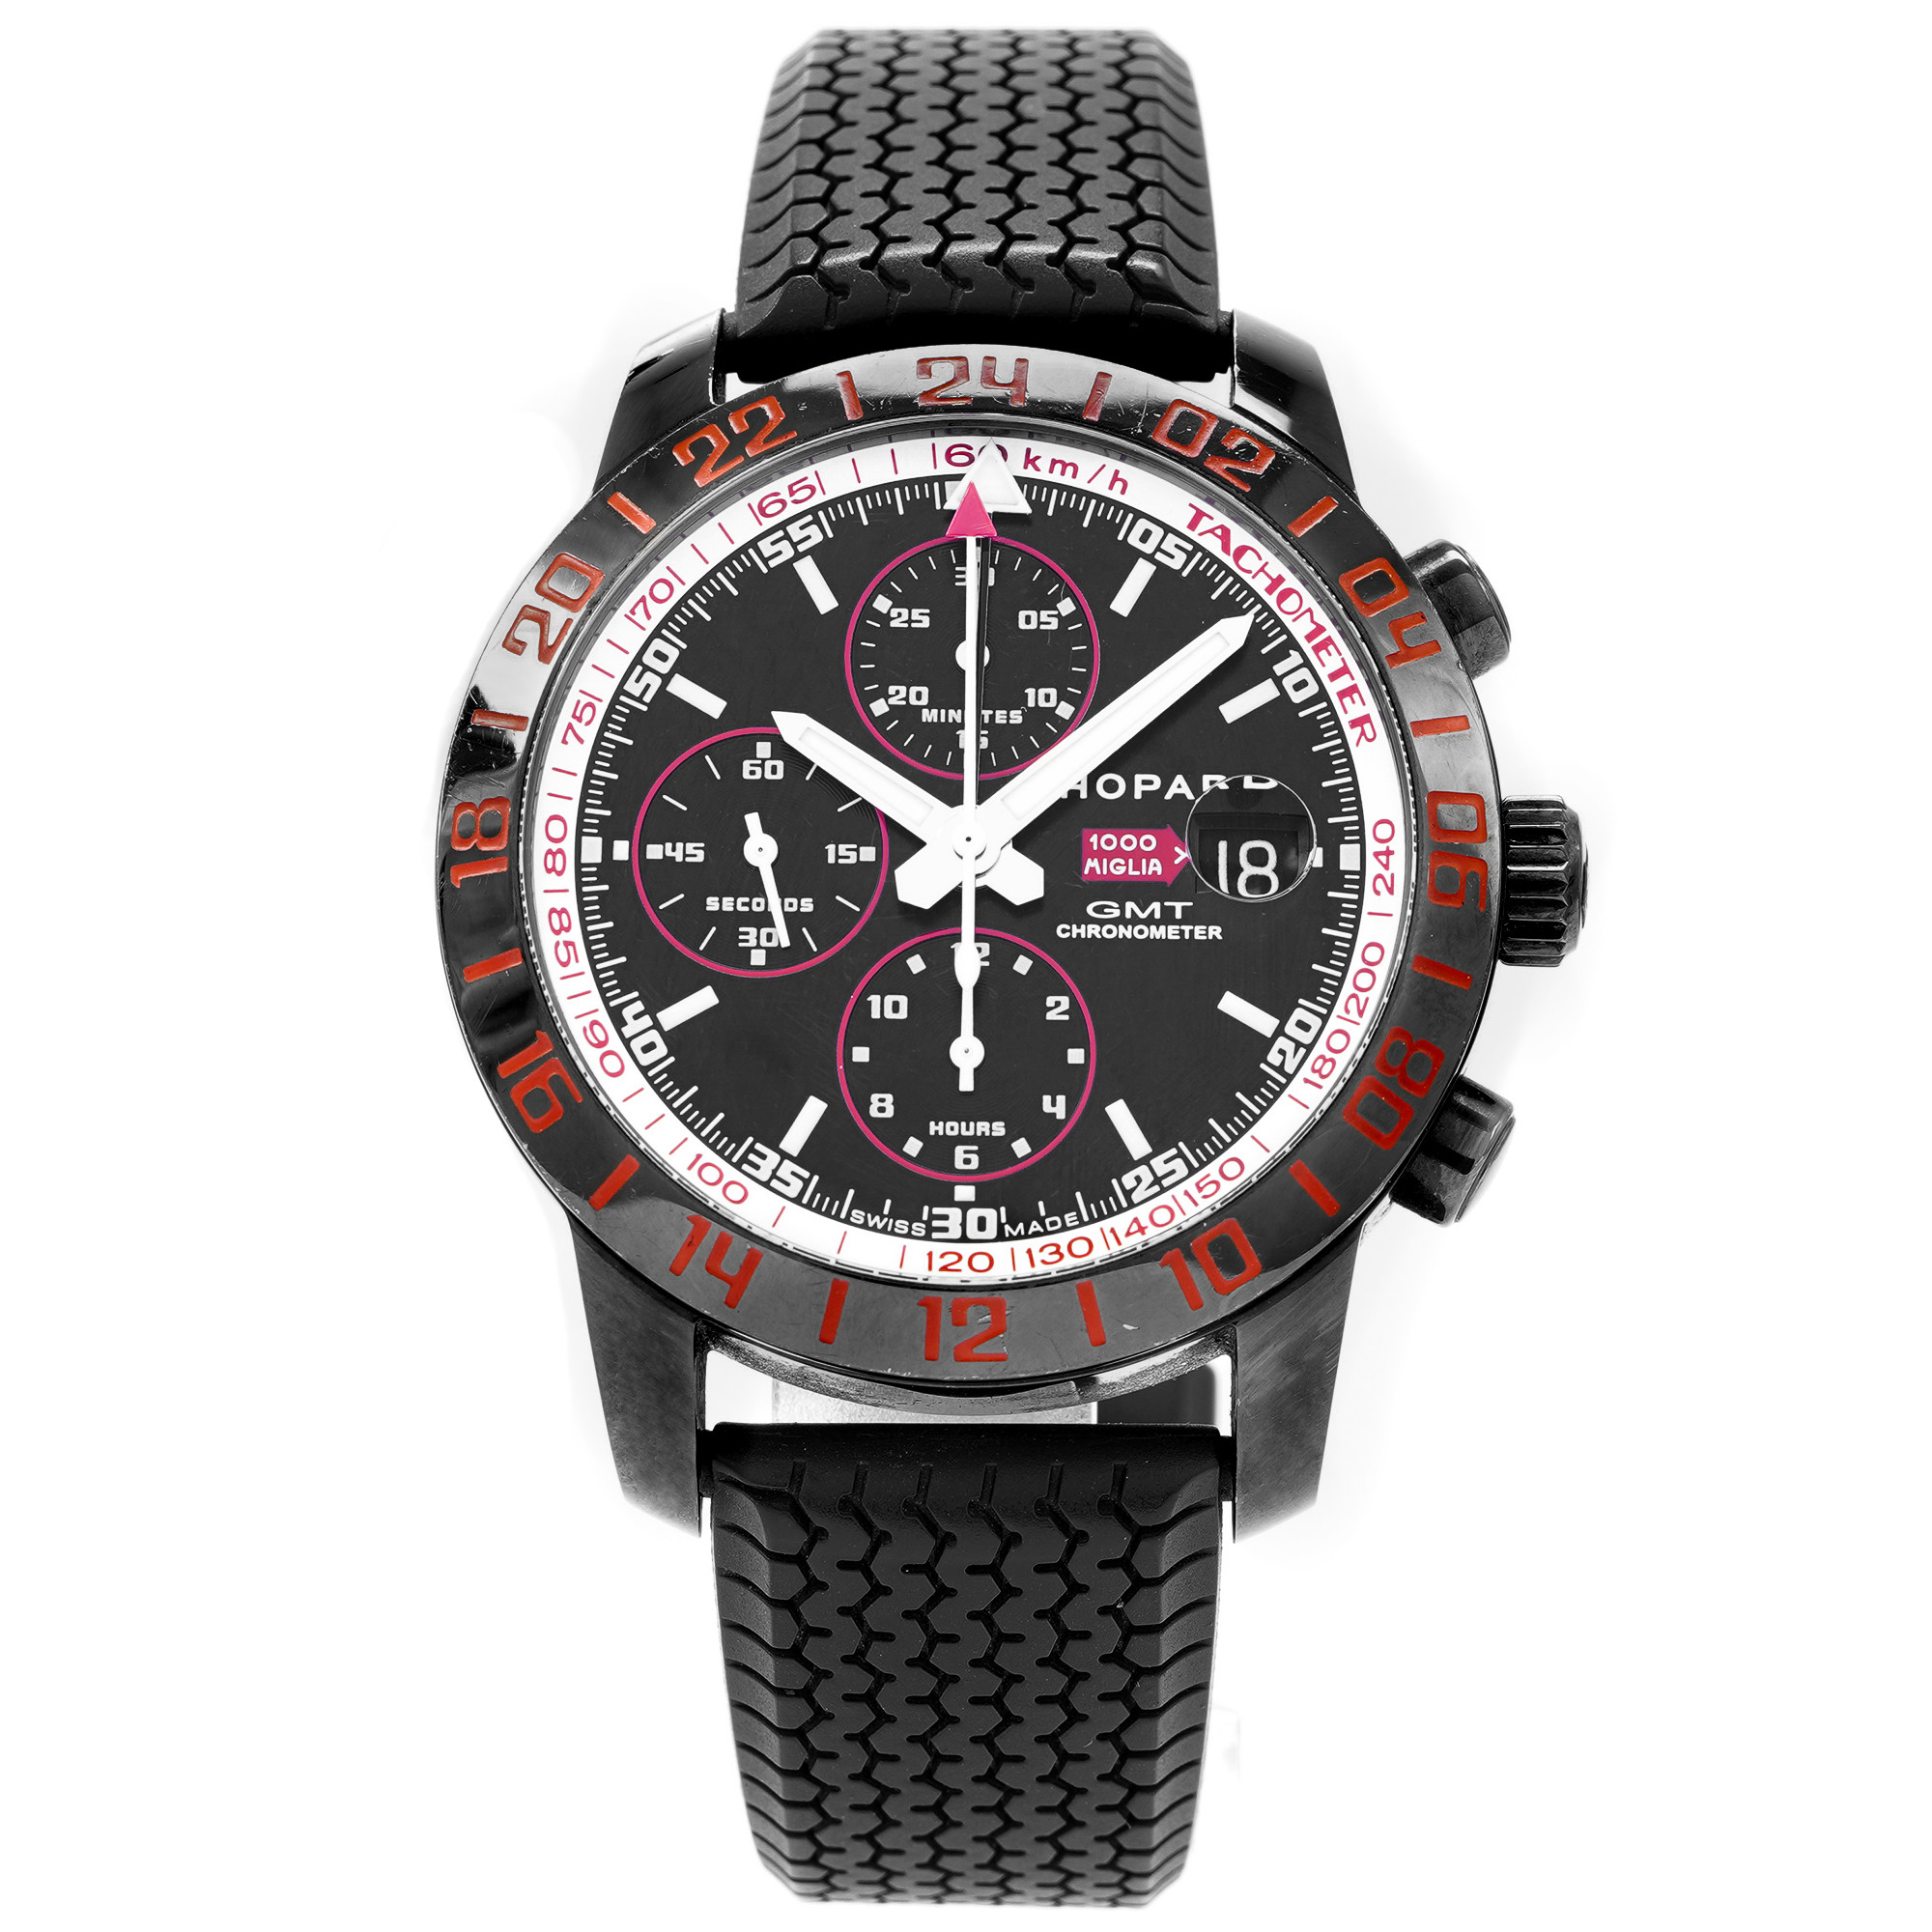 Chopard Mille Miglia Speed Black 2 GMT Ceramic *Limited Edition* - Inventory 5672